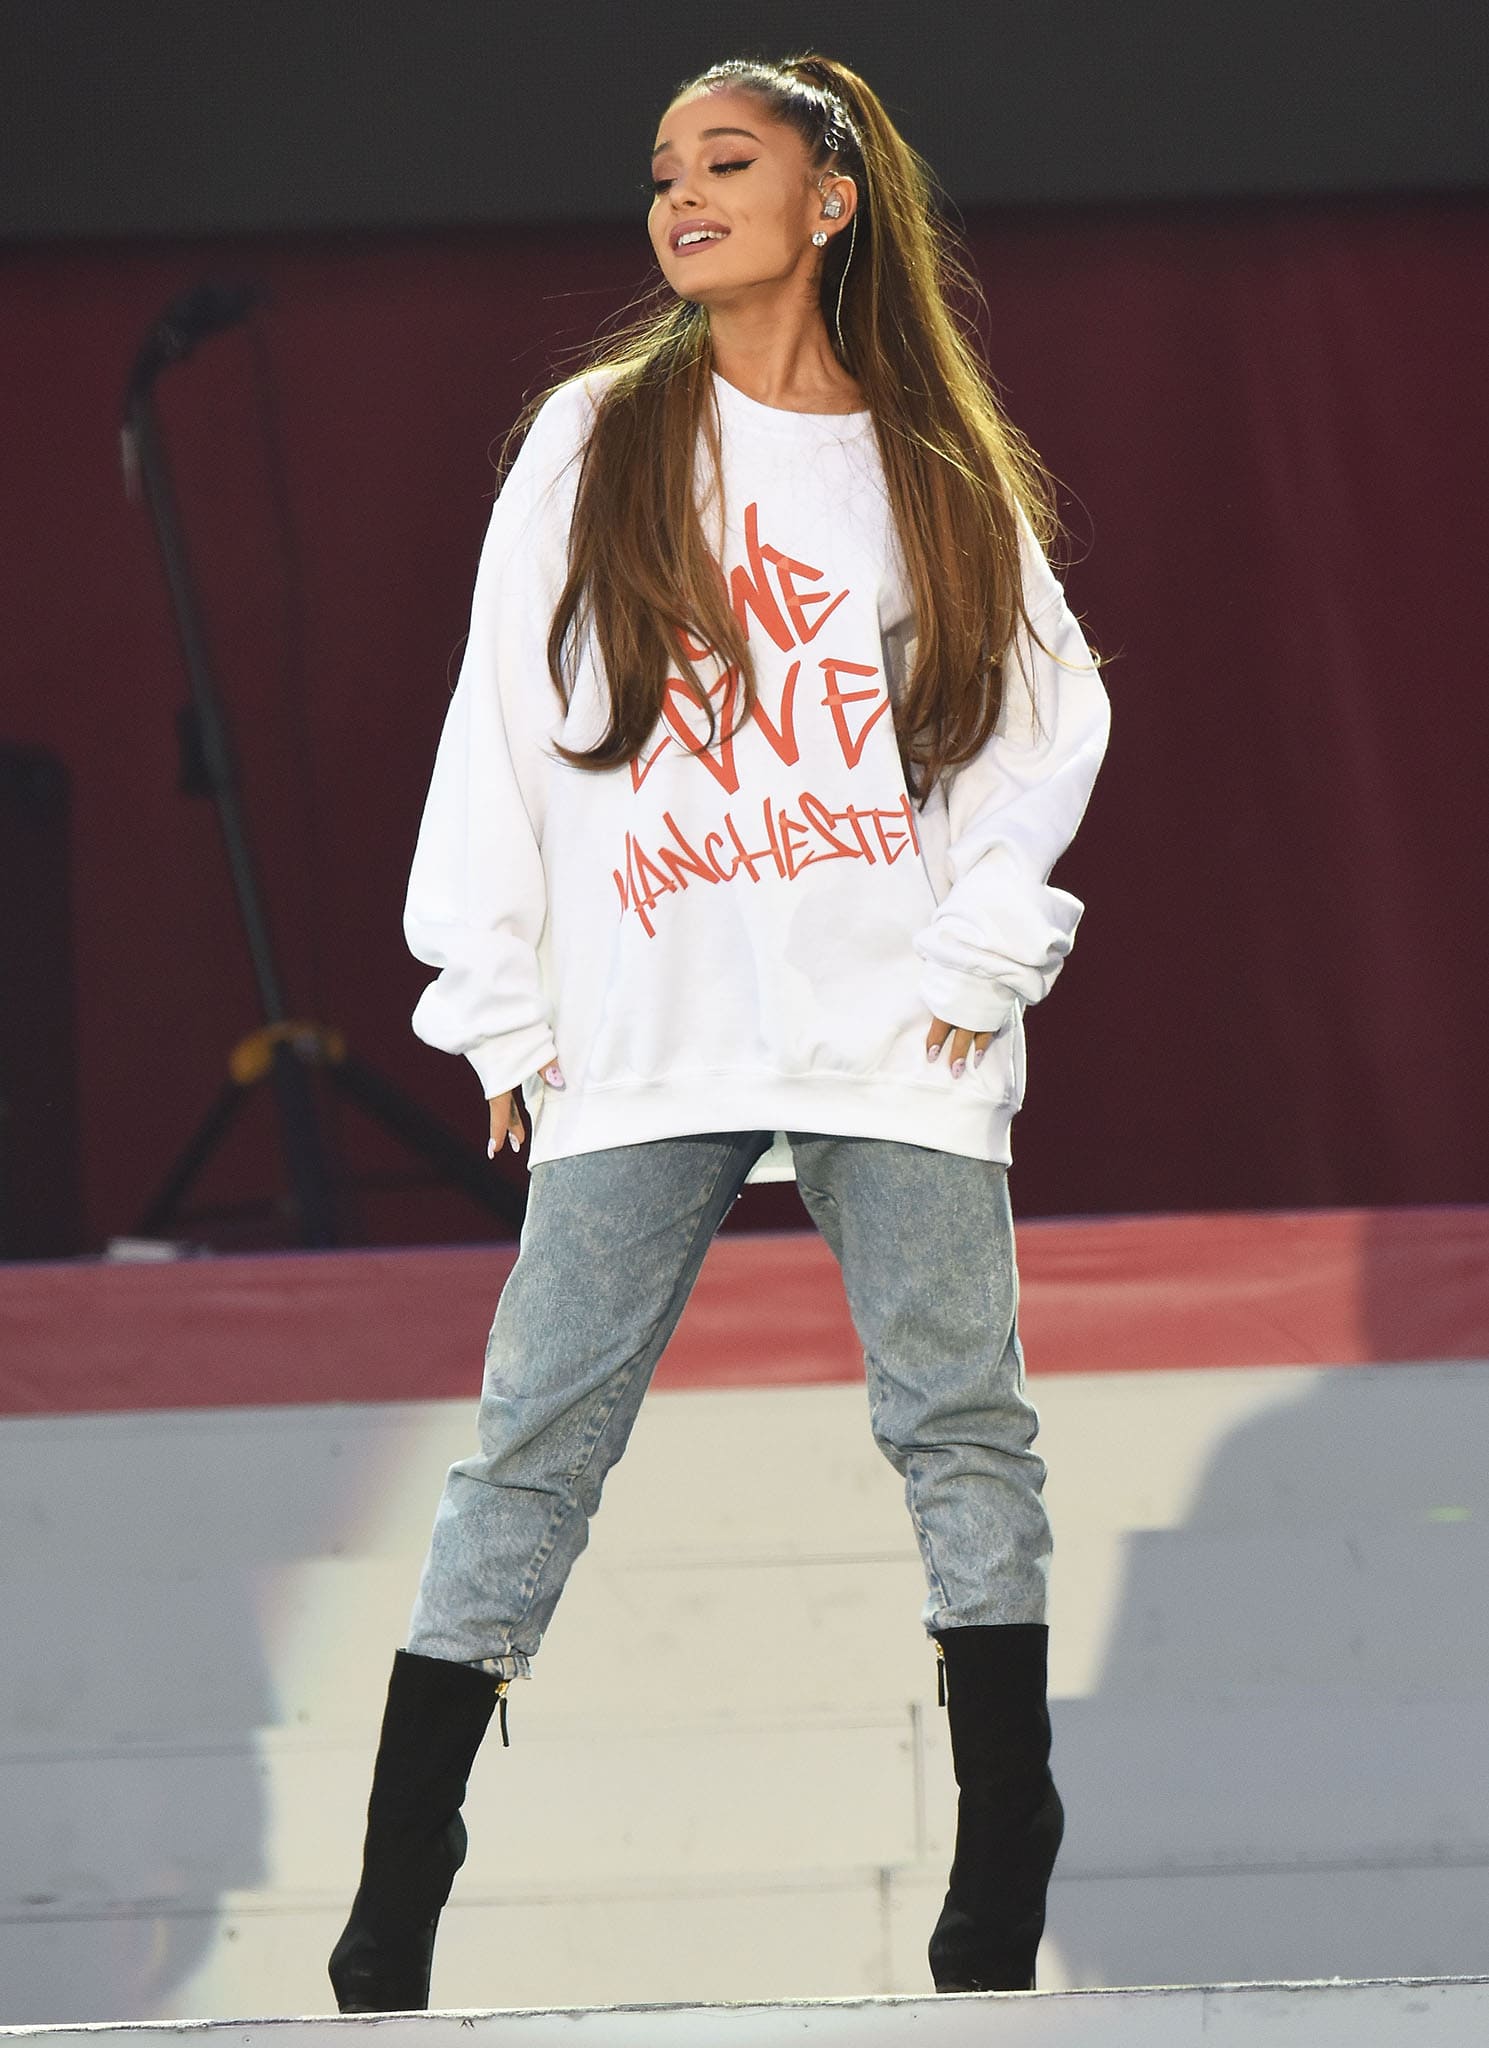 Ariana Grande also wears baggy clothes occasionally, covering up her actual figure